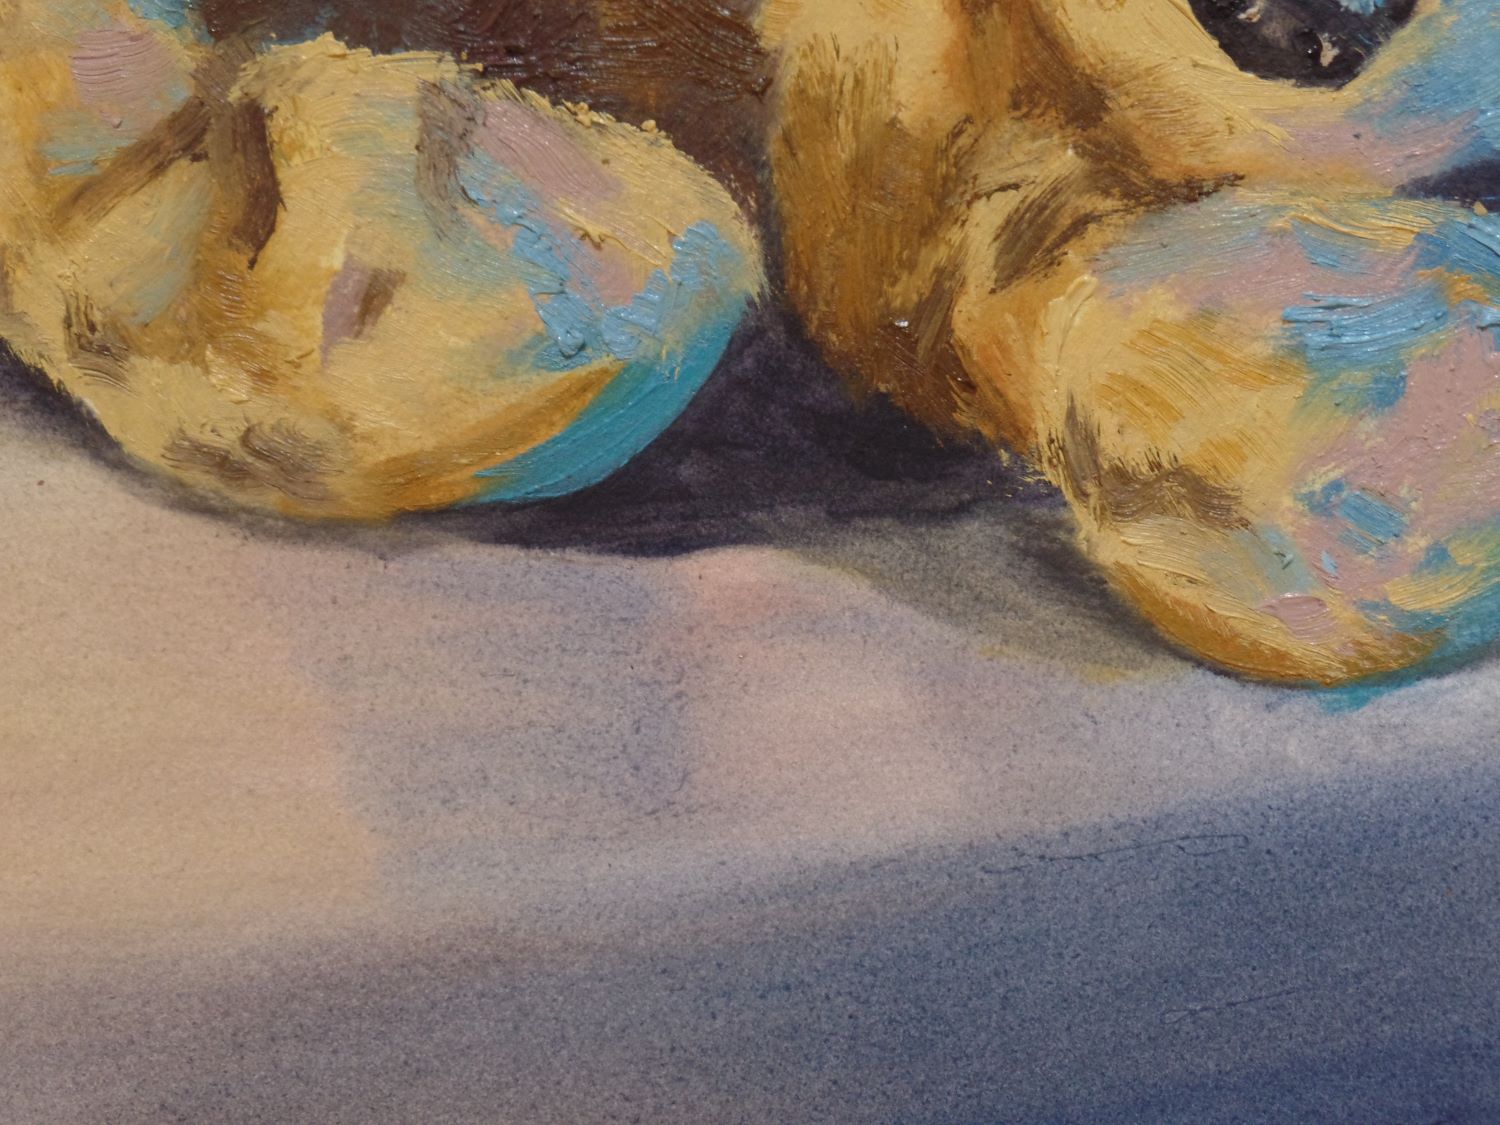 Close up of a painting of a stuffed animal's limbs